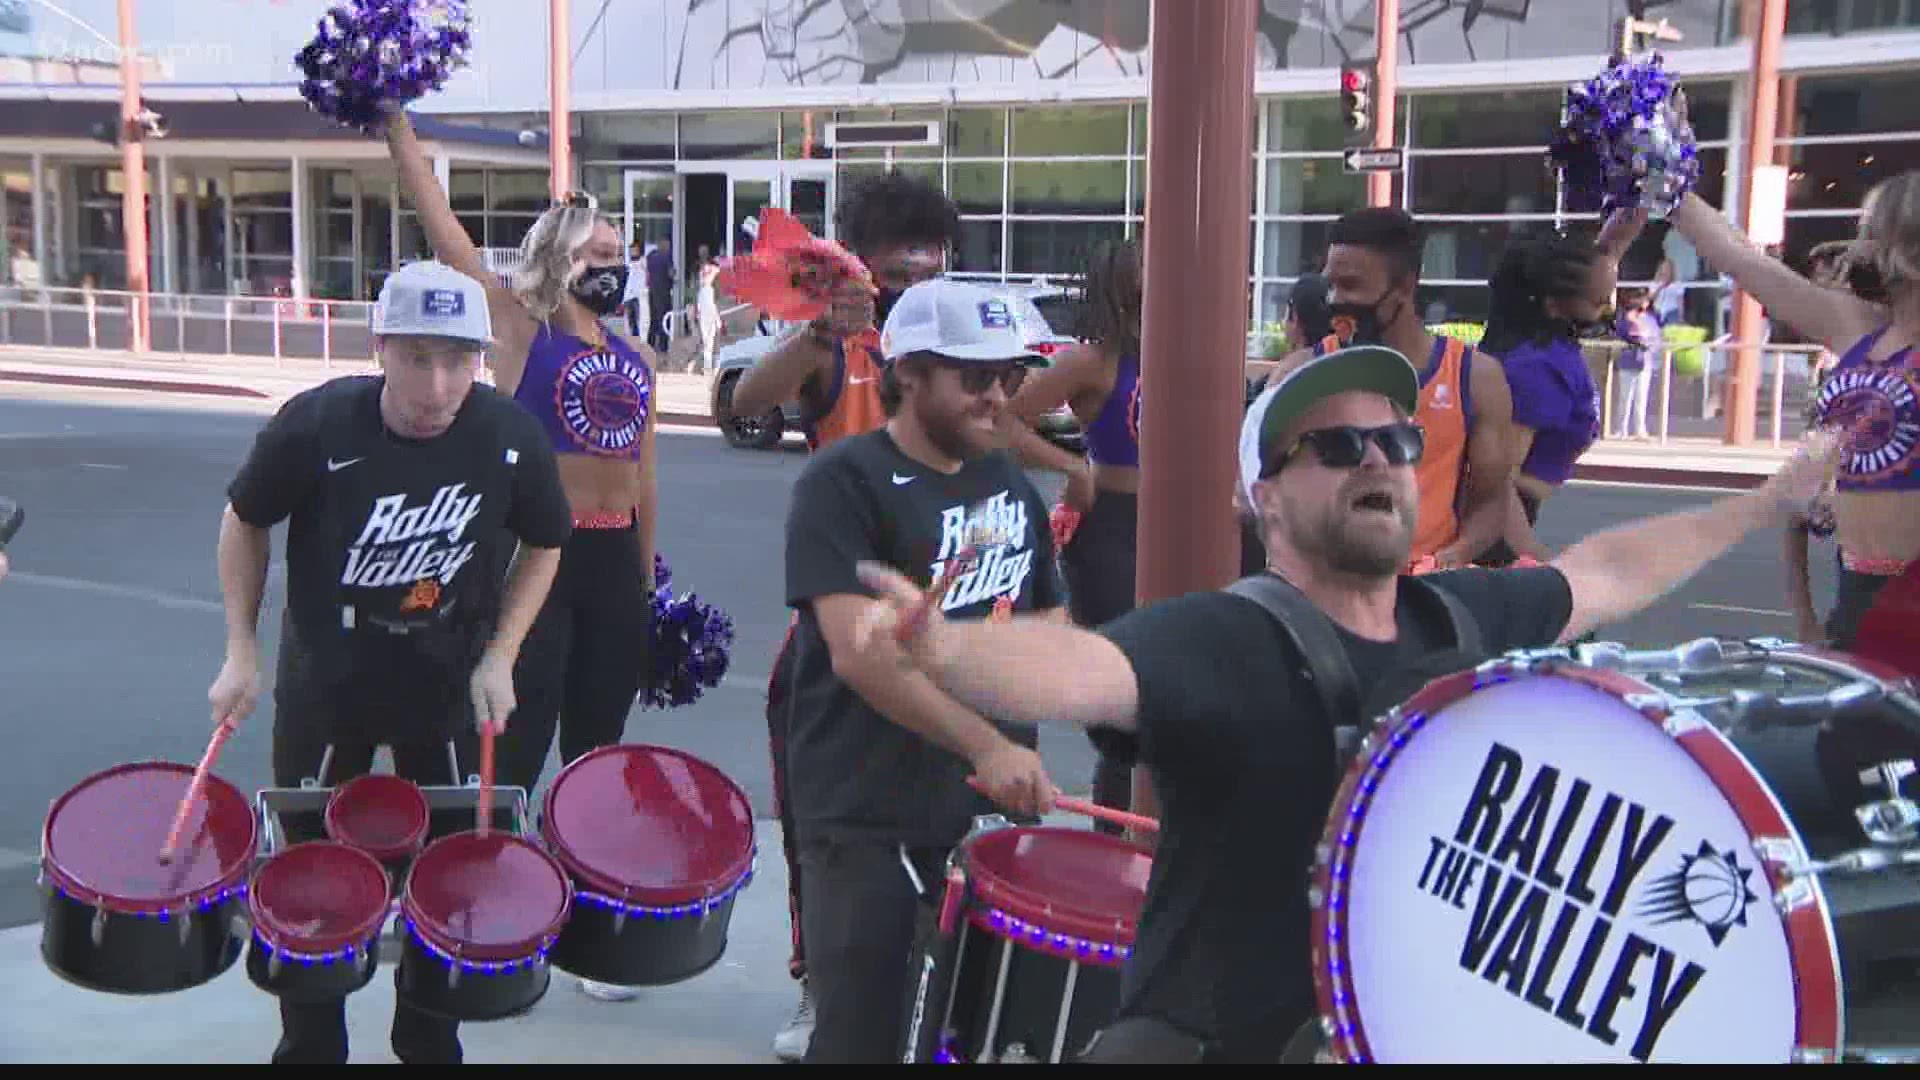 It was a busy night in downtown Phoenix Tuesday as fans for both the Arizona Diamondbacks and Phoenix Suns took to the streets to cheer on their respective teams.